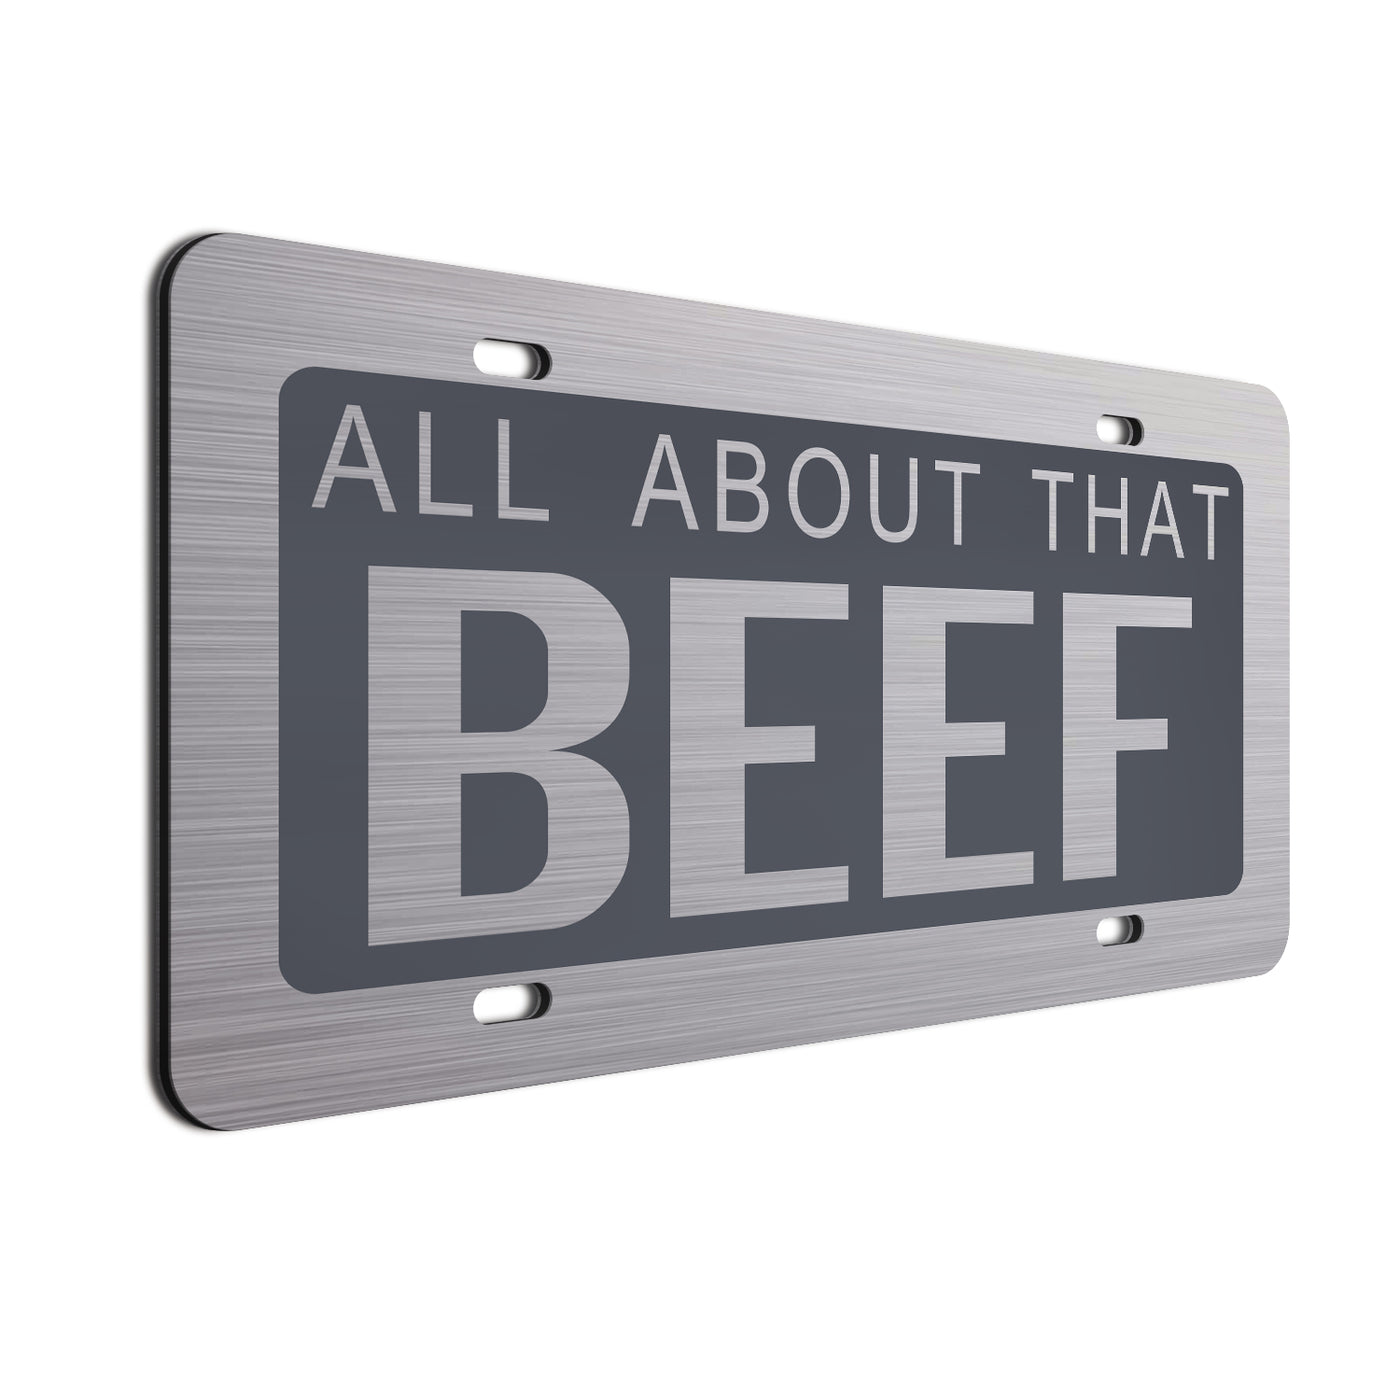  All About That Beef: Charcoal